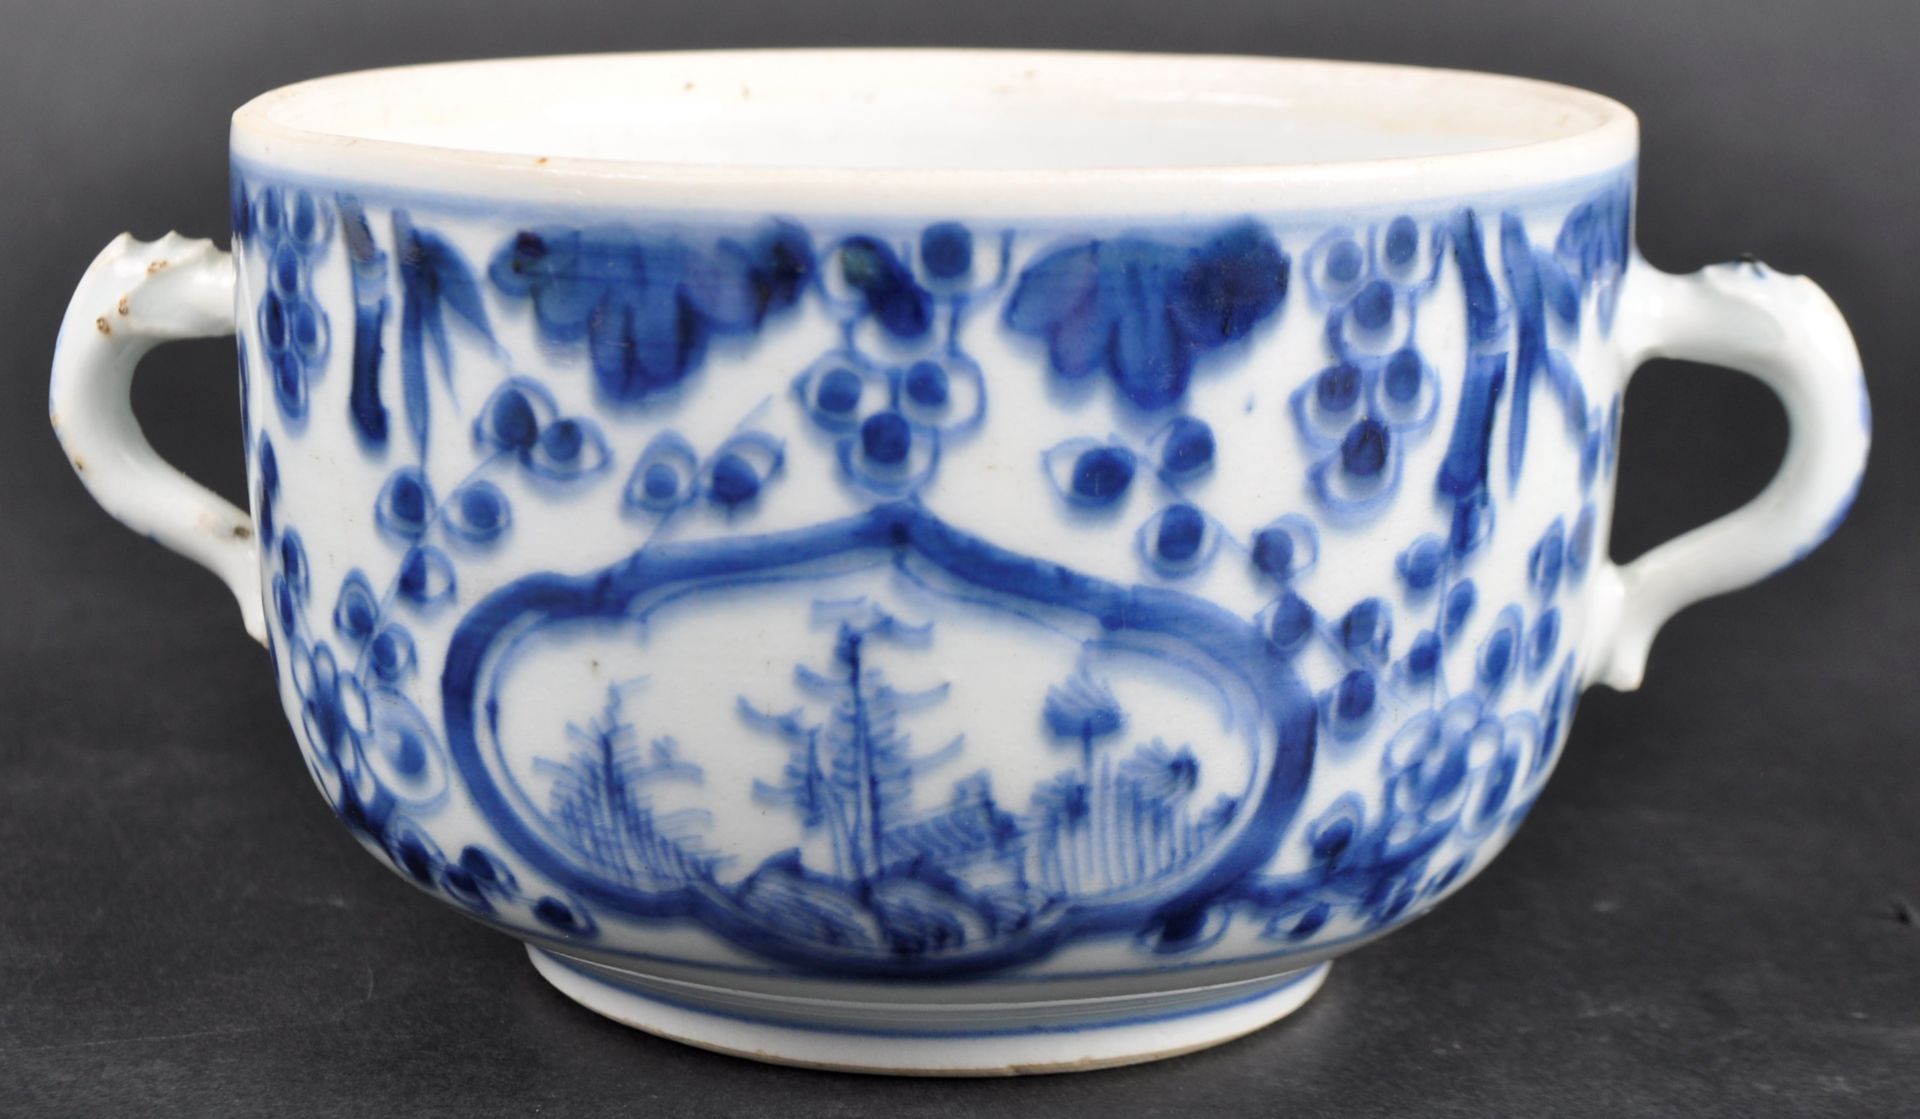 EARLY 19TH CENTURY CHINESE BLUE & WHITE CAUDLE CUP - Image 9 of 10